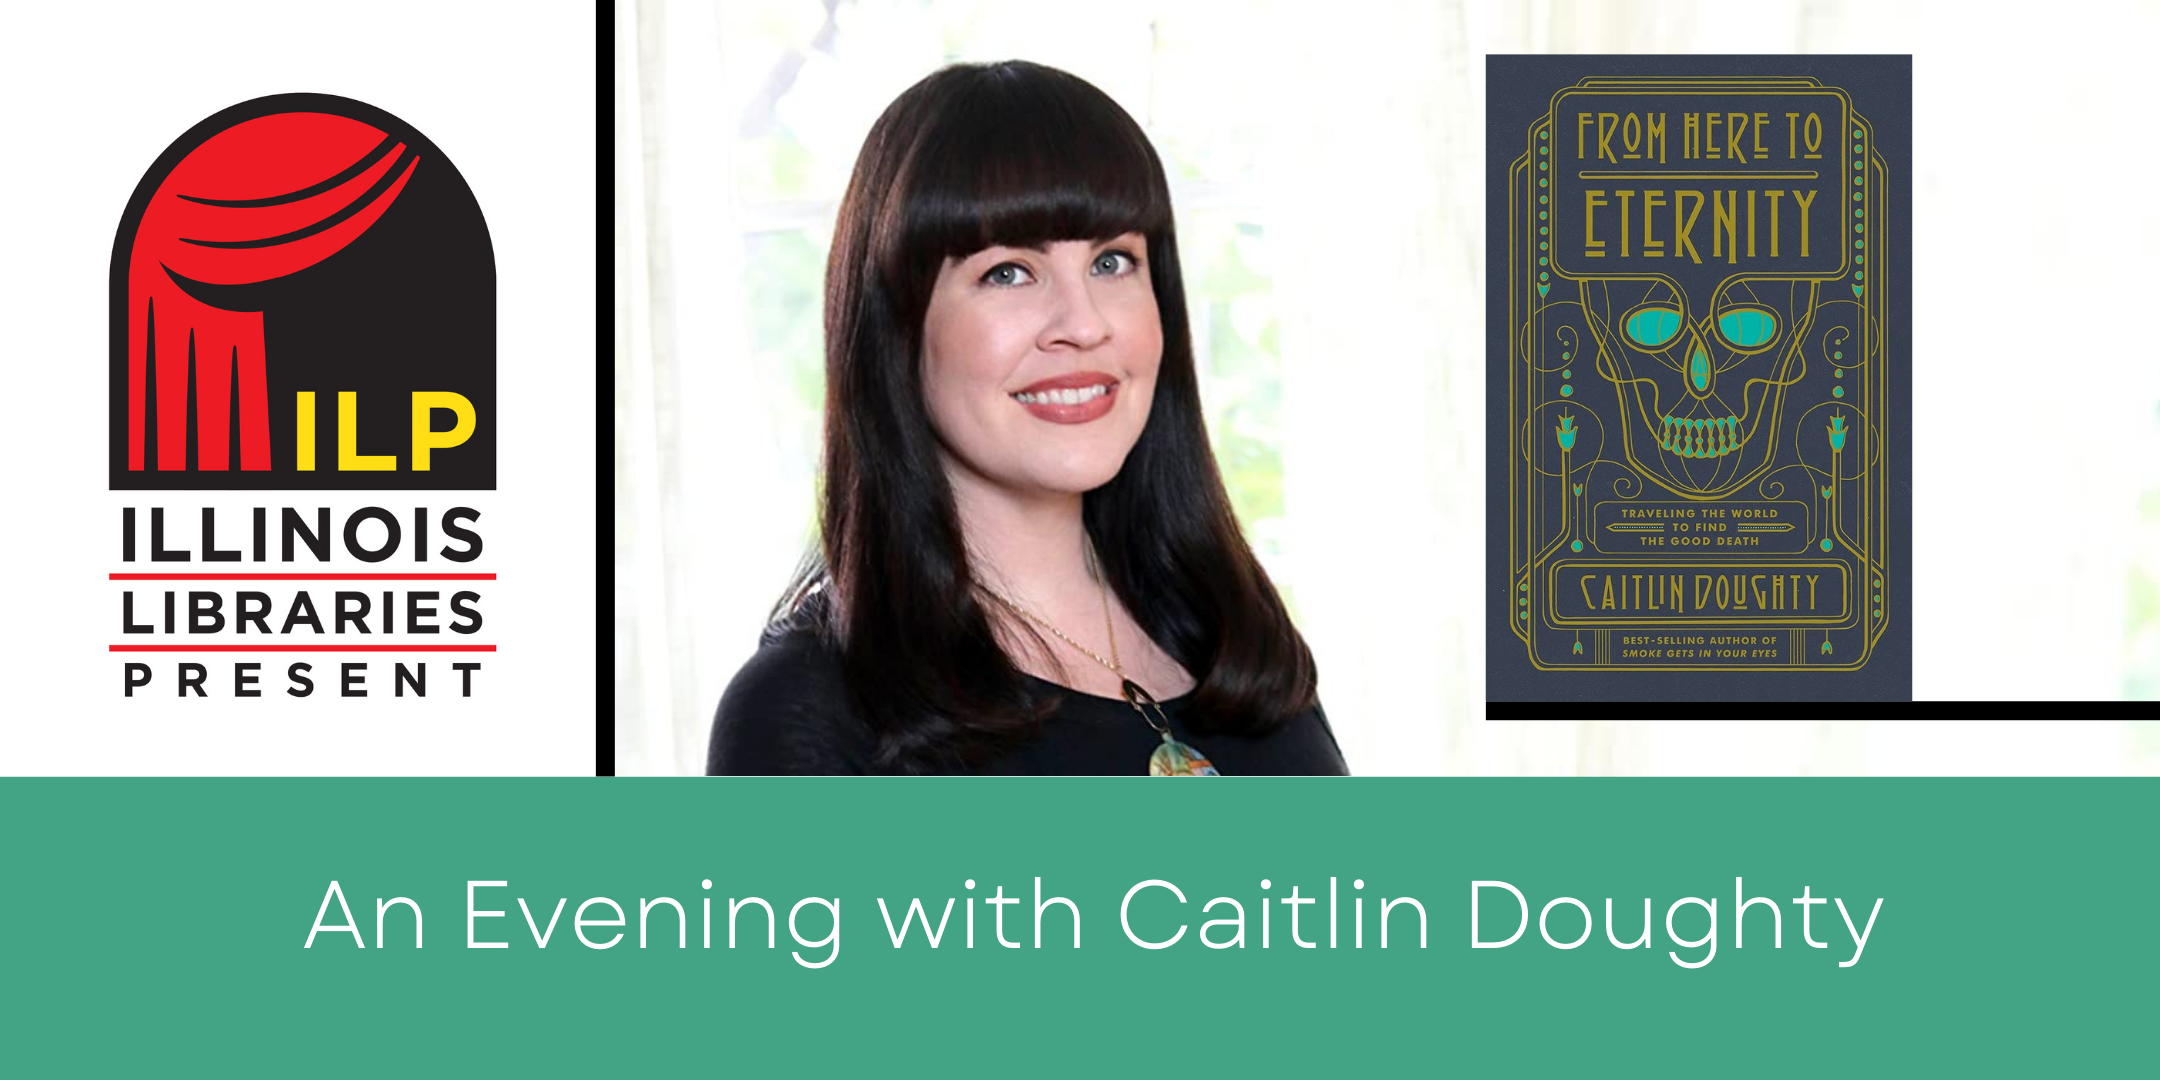 image of "Illinois Libraries Present: An Evening with Caitlin Doughty"